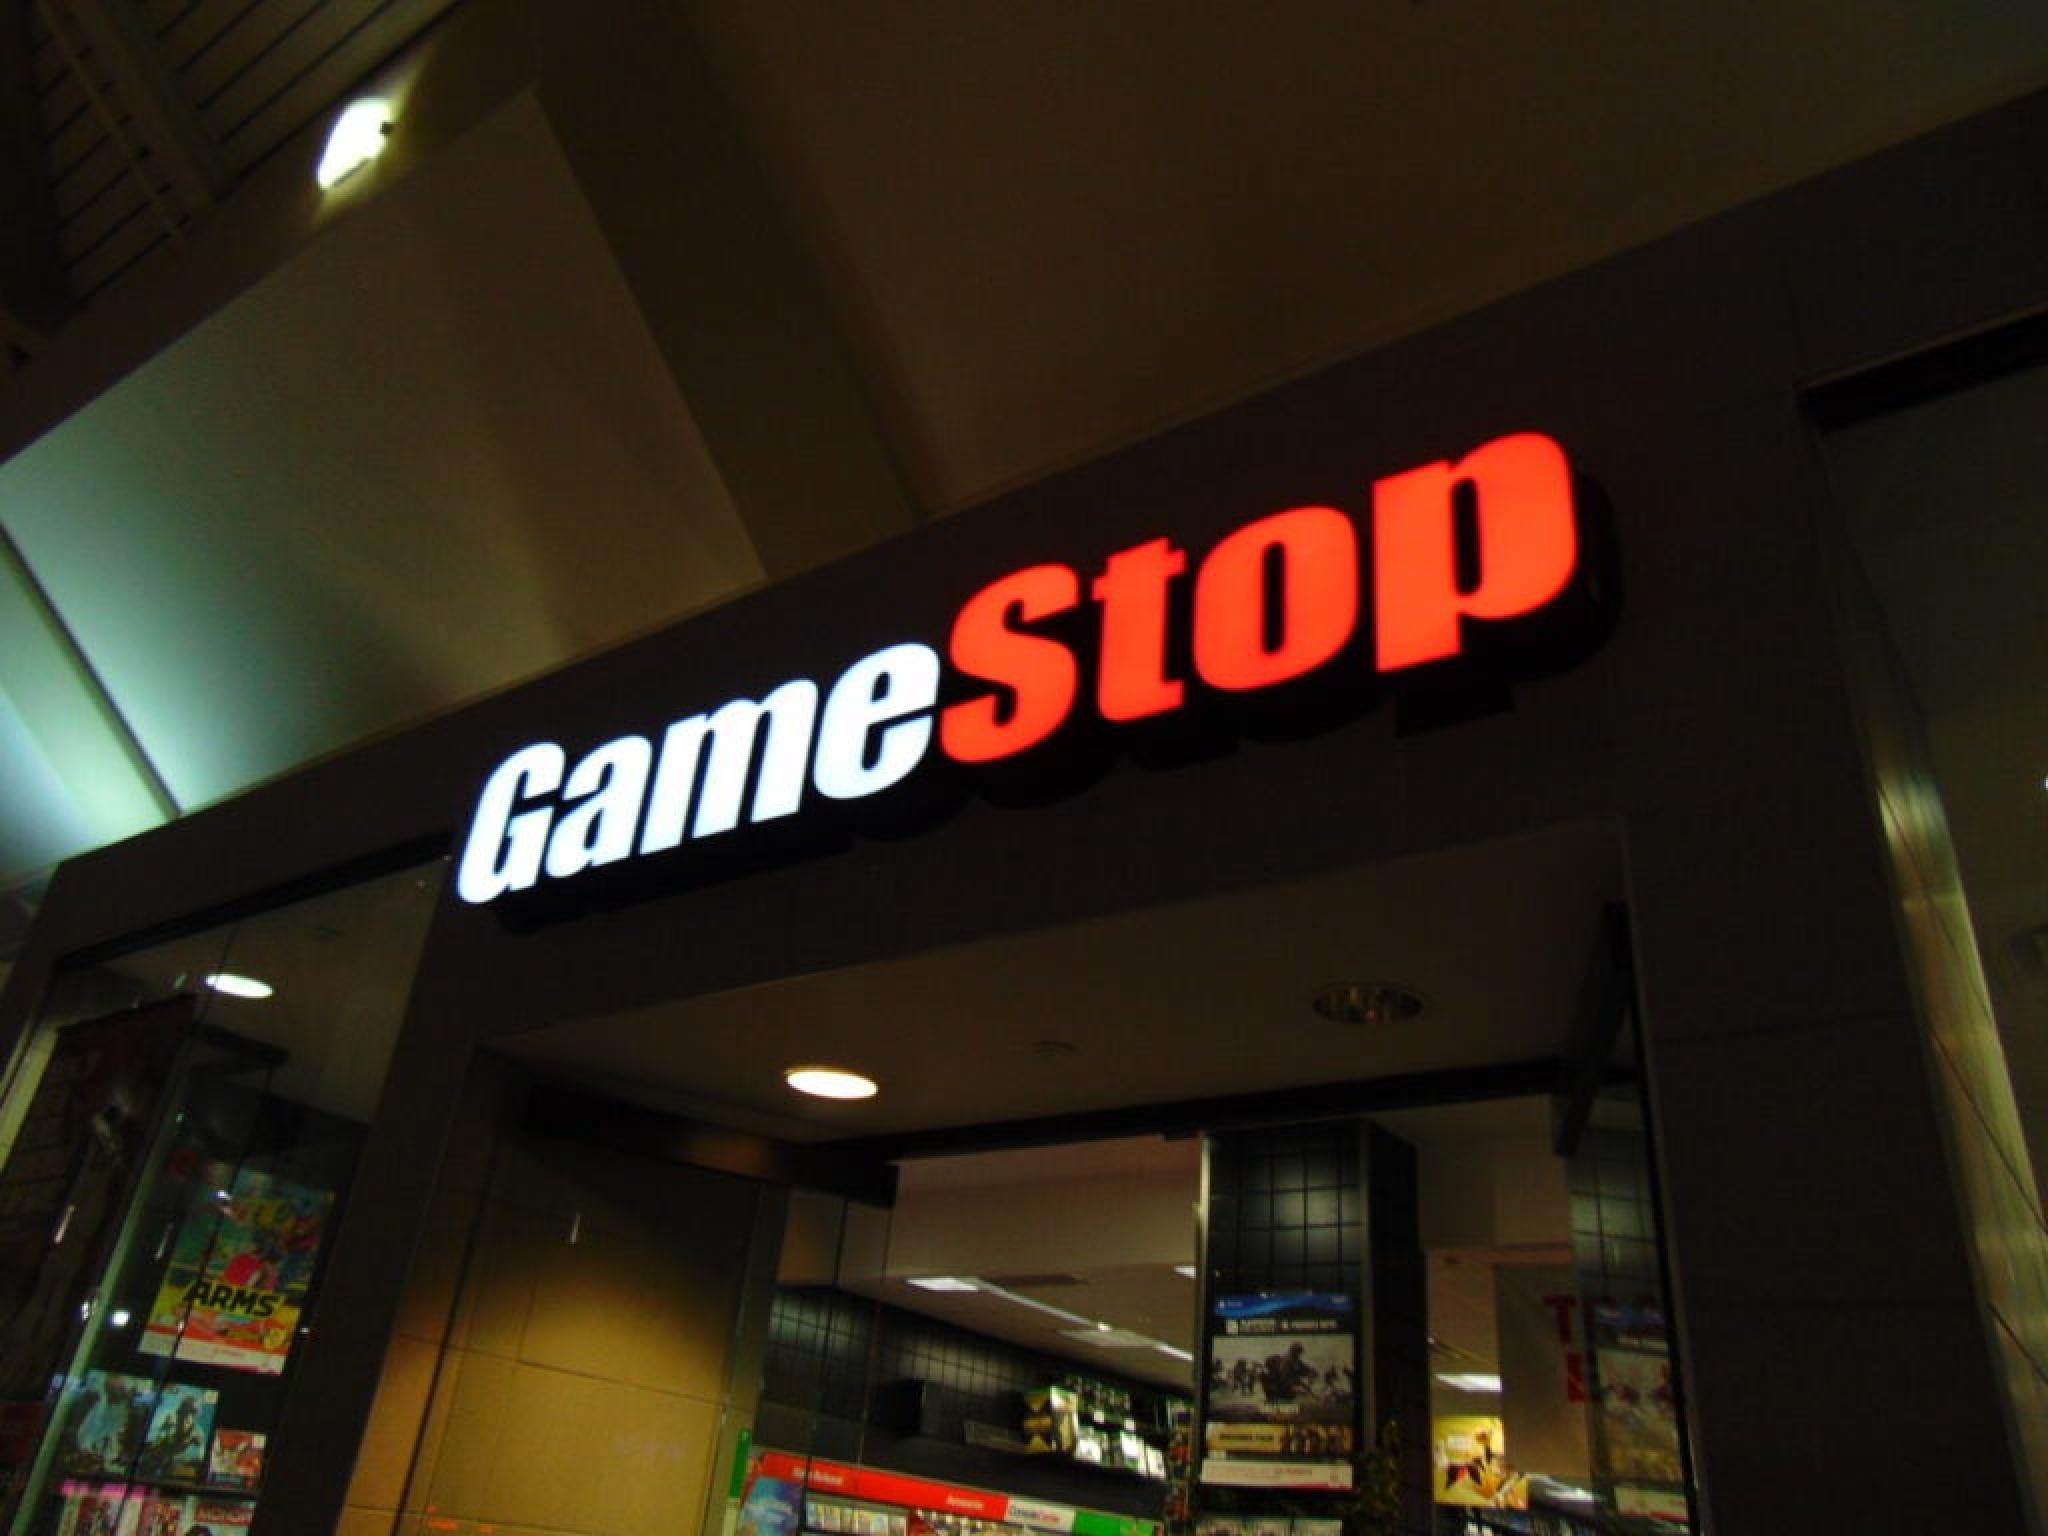  whats-going-on-with-gamestop-stock 